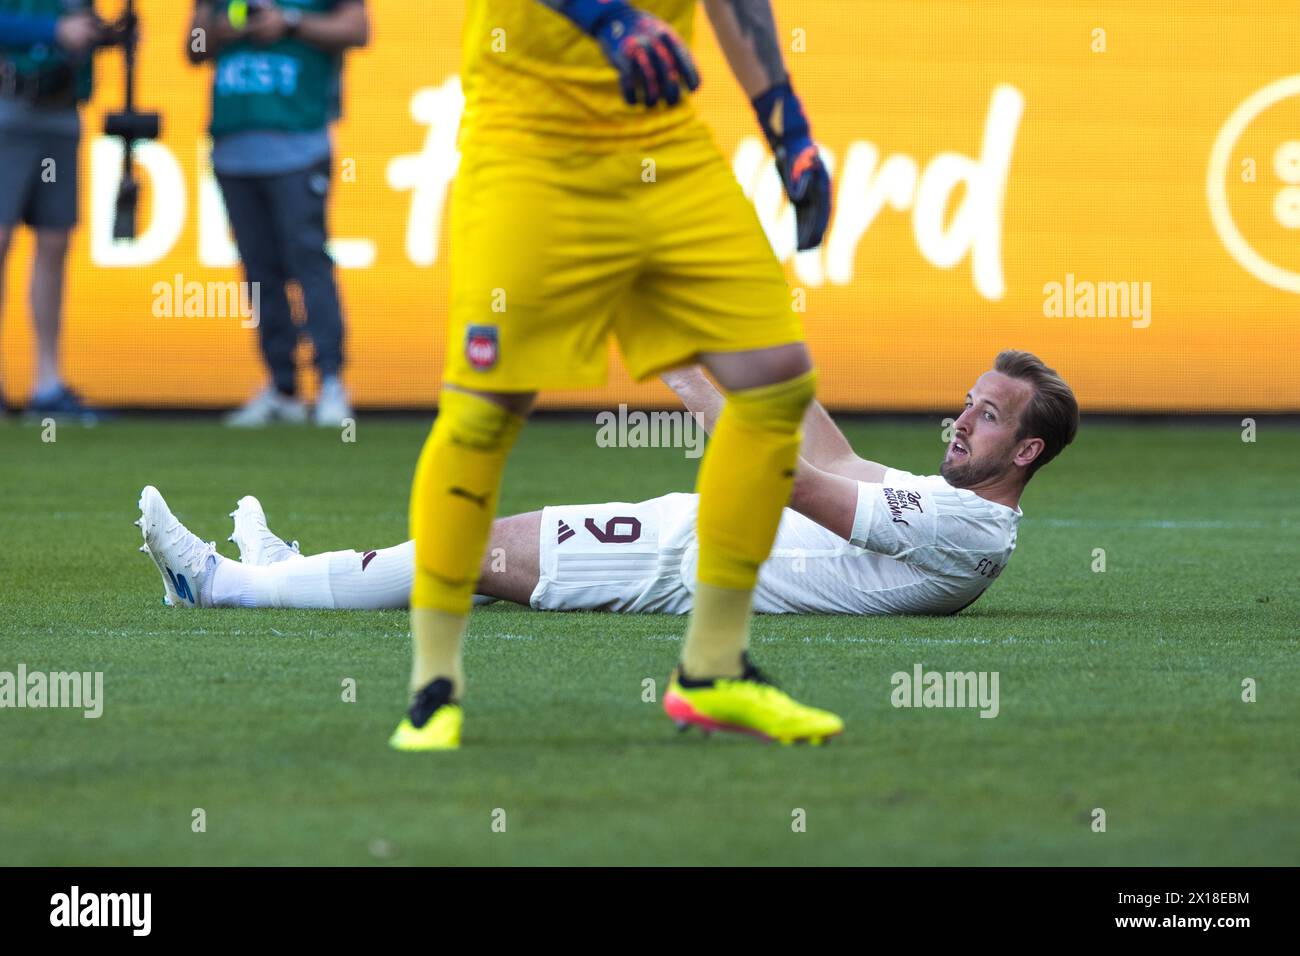 Football match, Harry KANE Bayern Munich on the ground after a missed action, partly in the foreground Kevin MUeLLER 1.FC Heidenheim, football Stock Photo